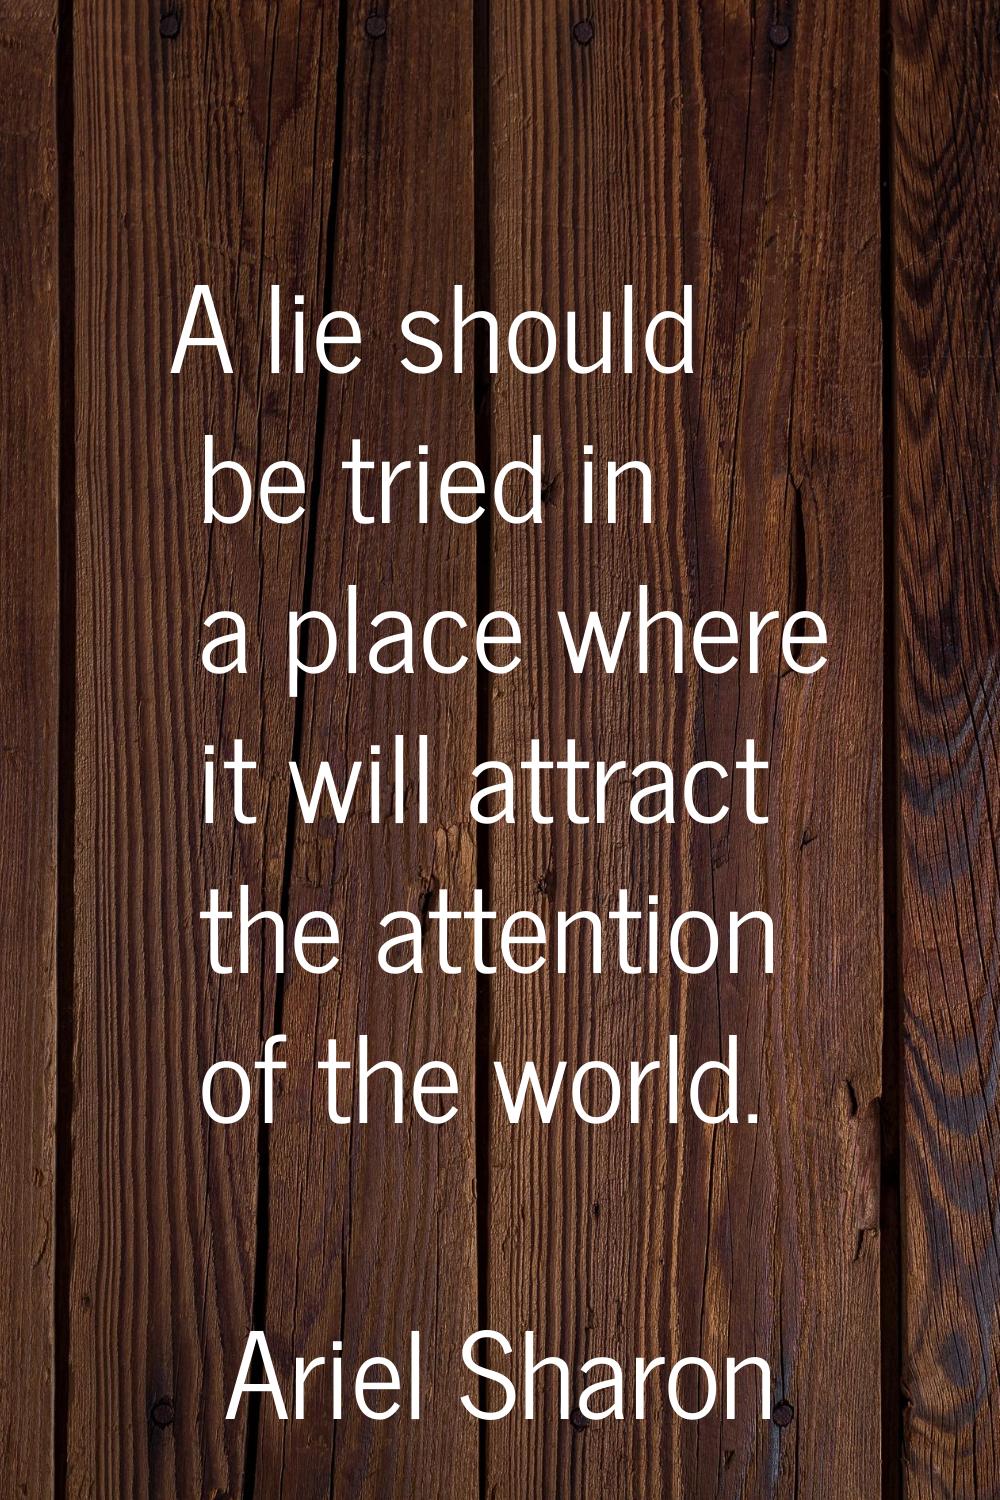 A lie should be tried in a place where it will attract the attention of the world.